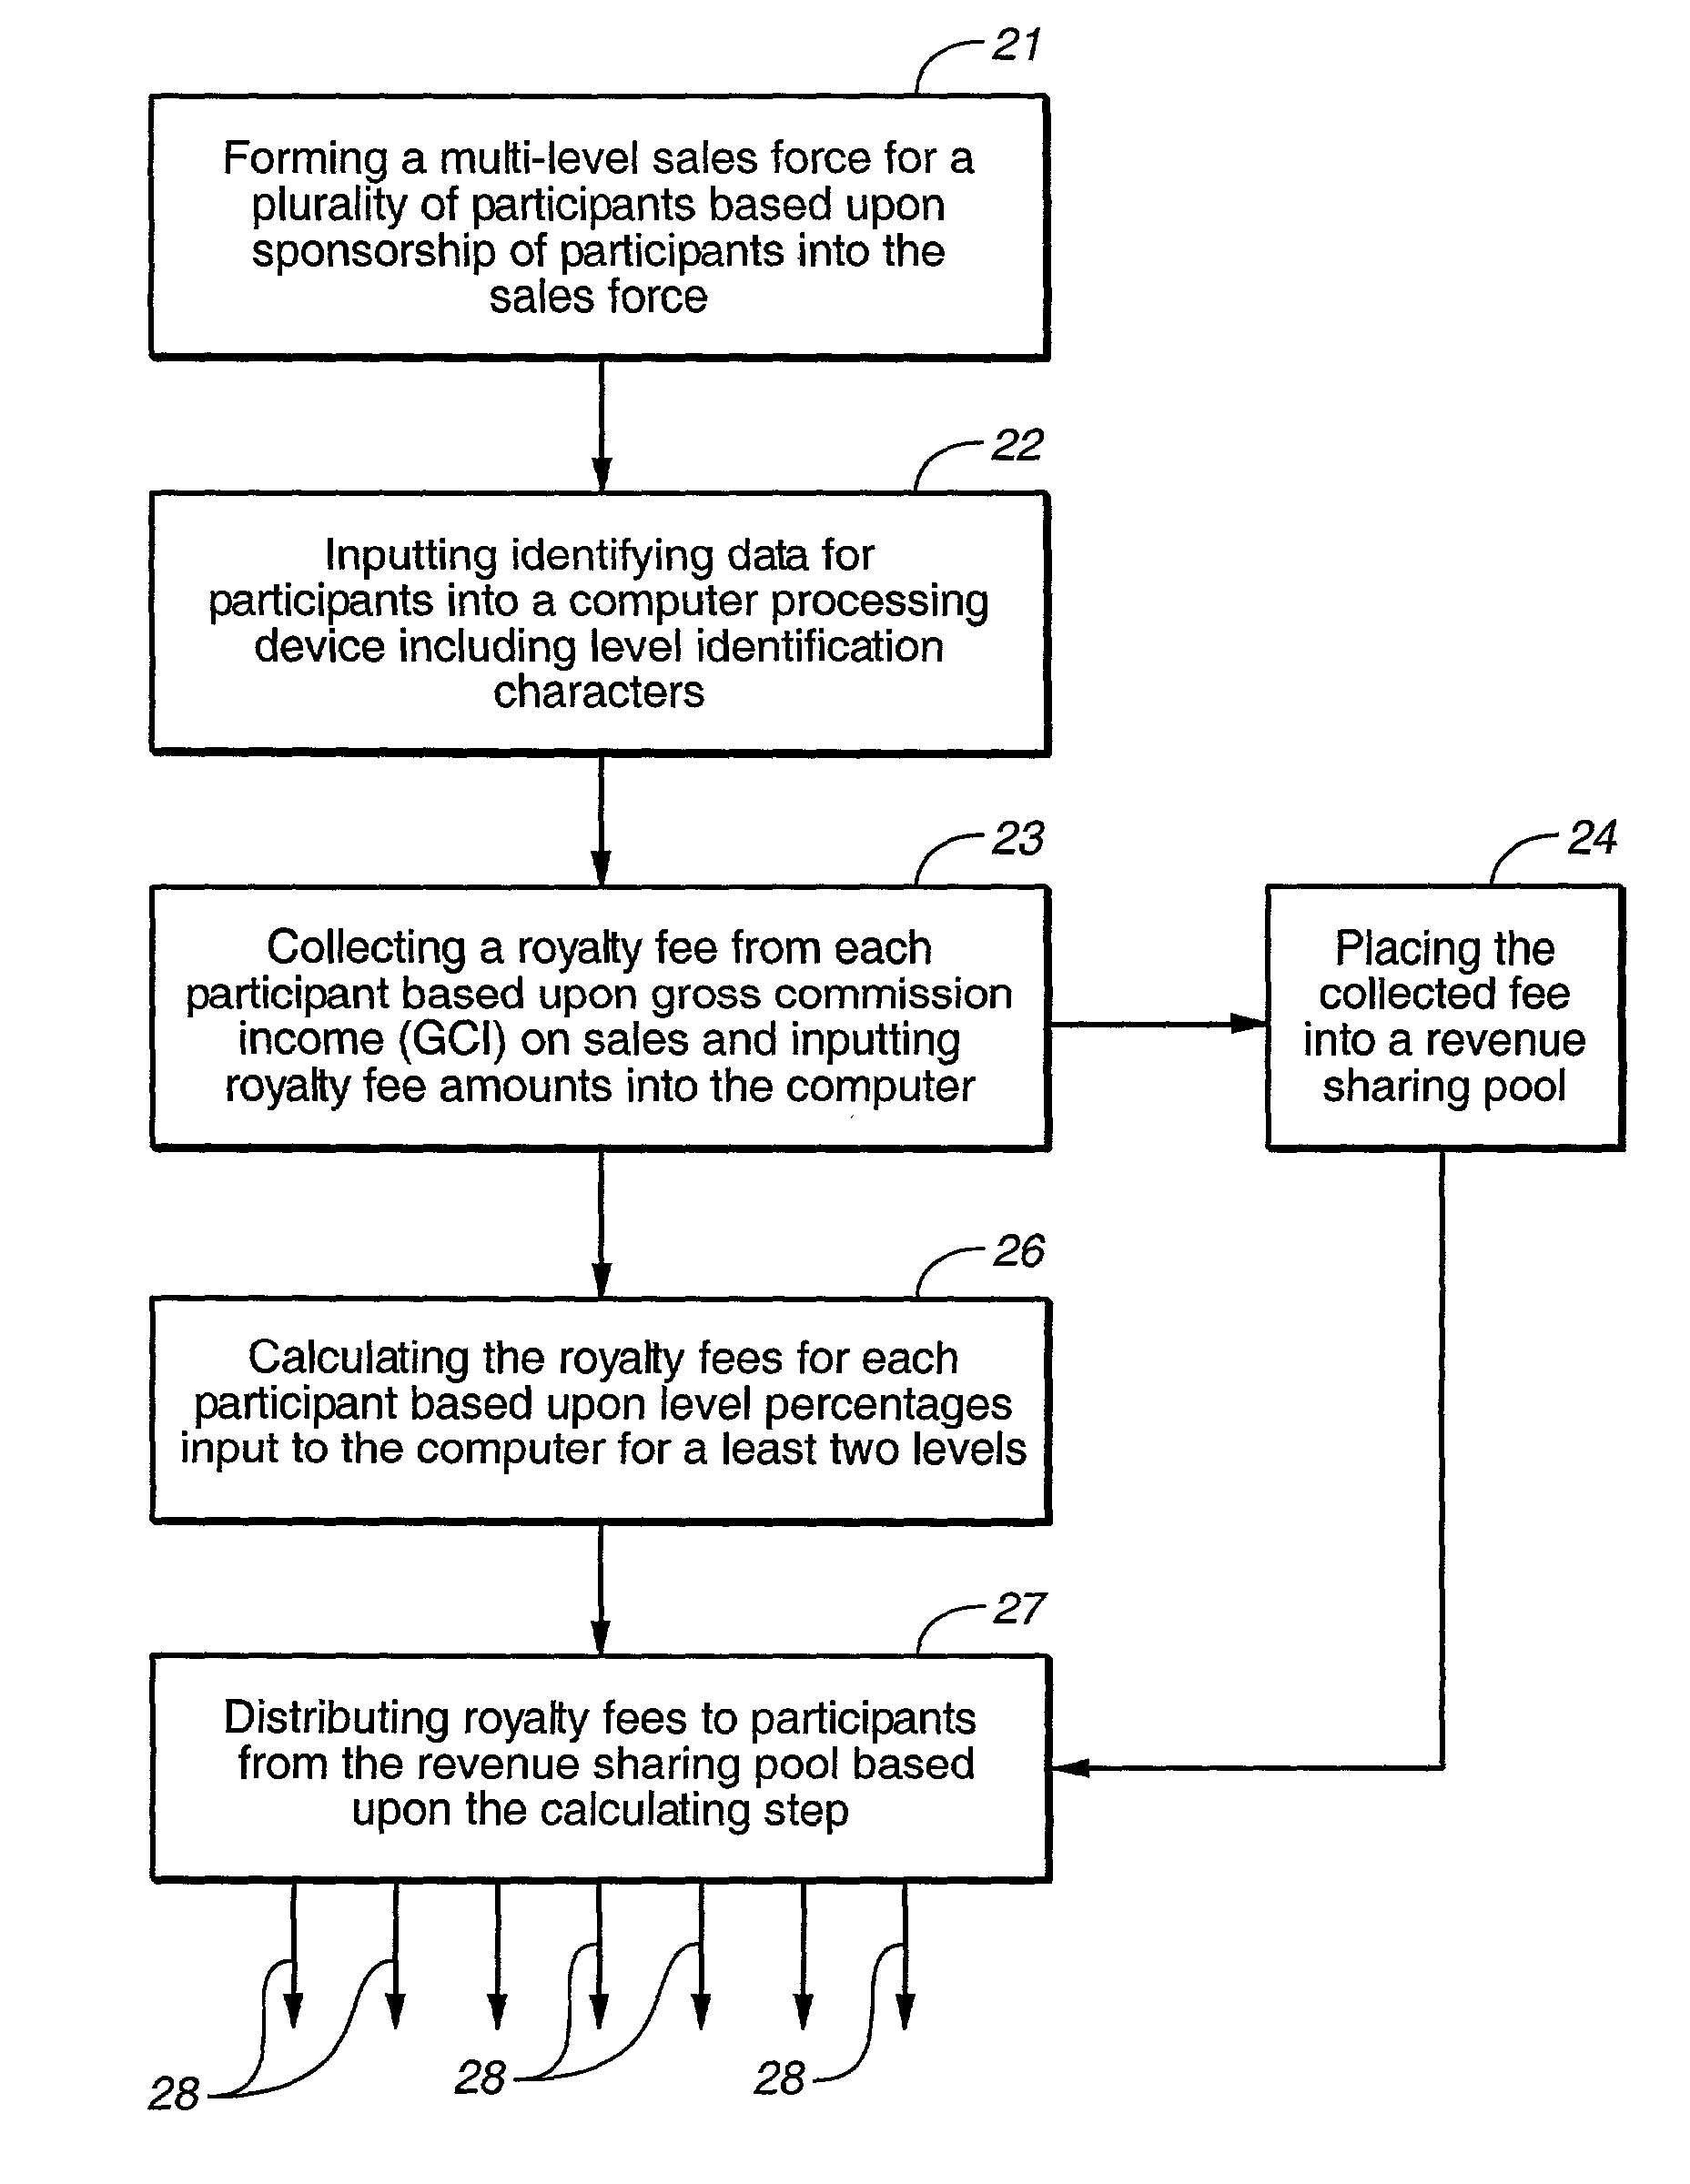 Method and apparatus for compensating a plurality of franchise participants in a multi-level sales force